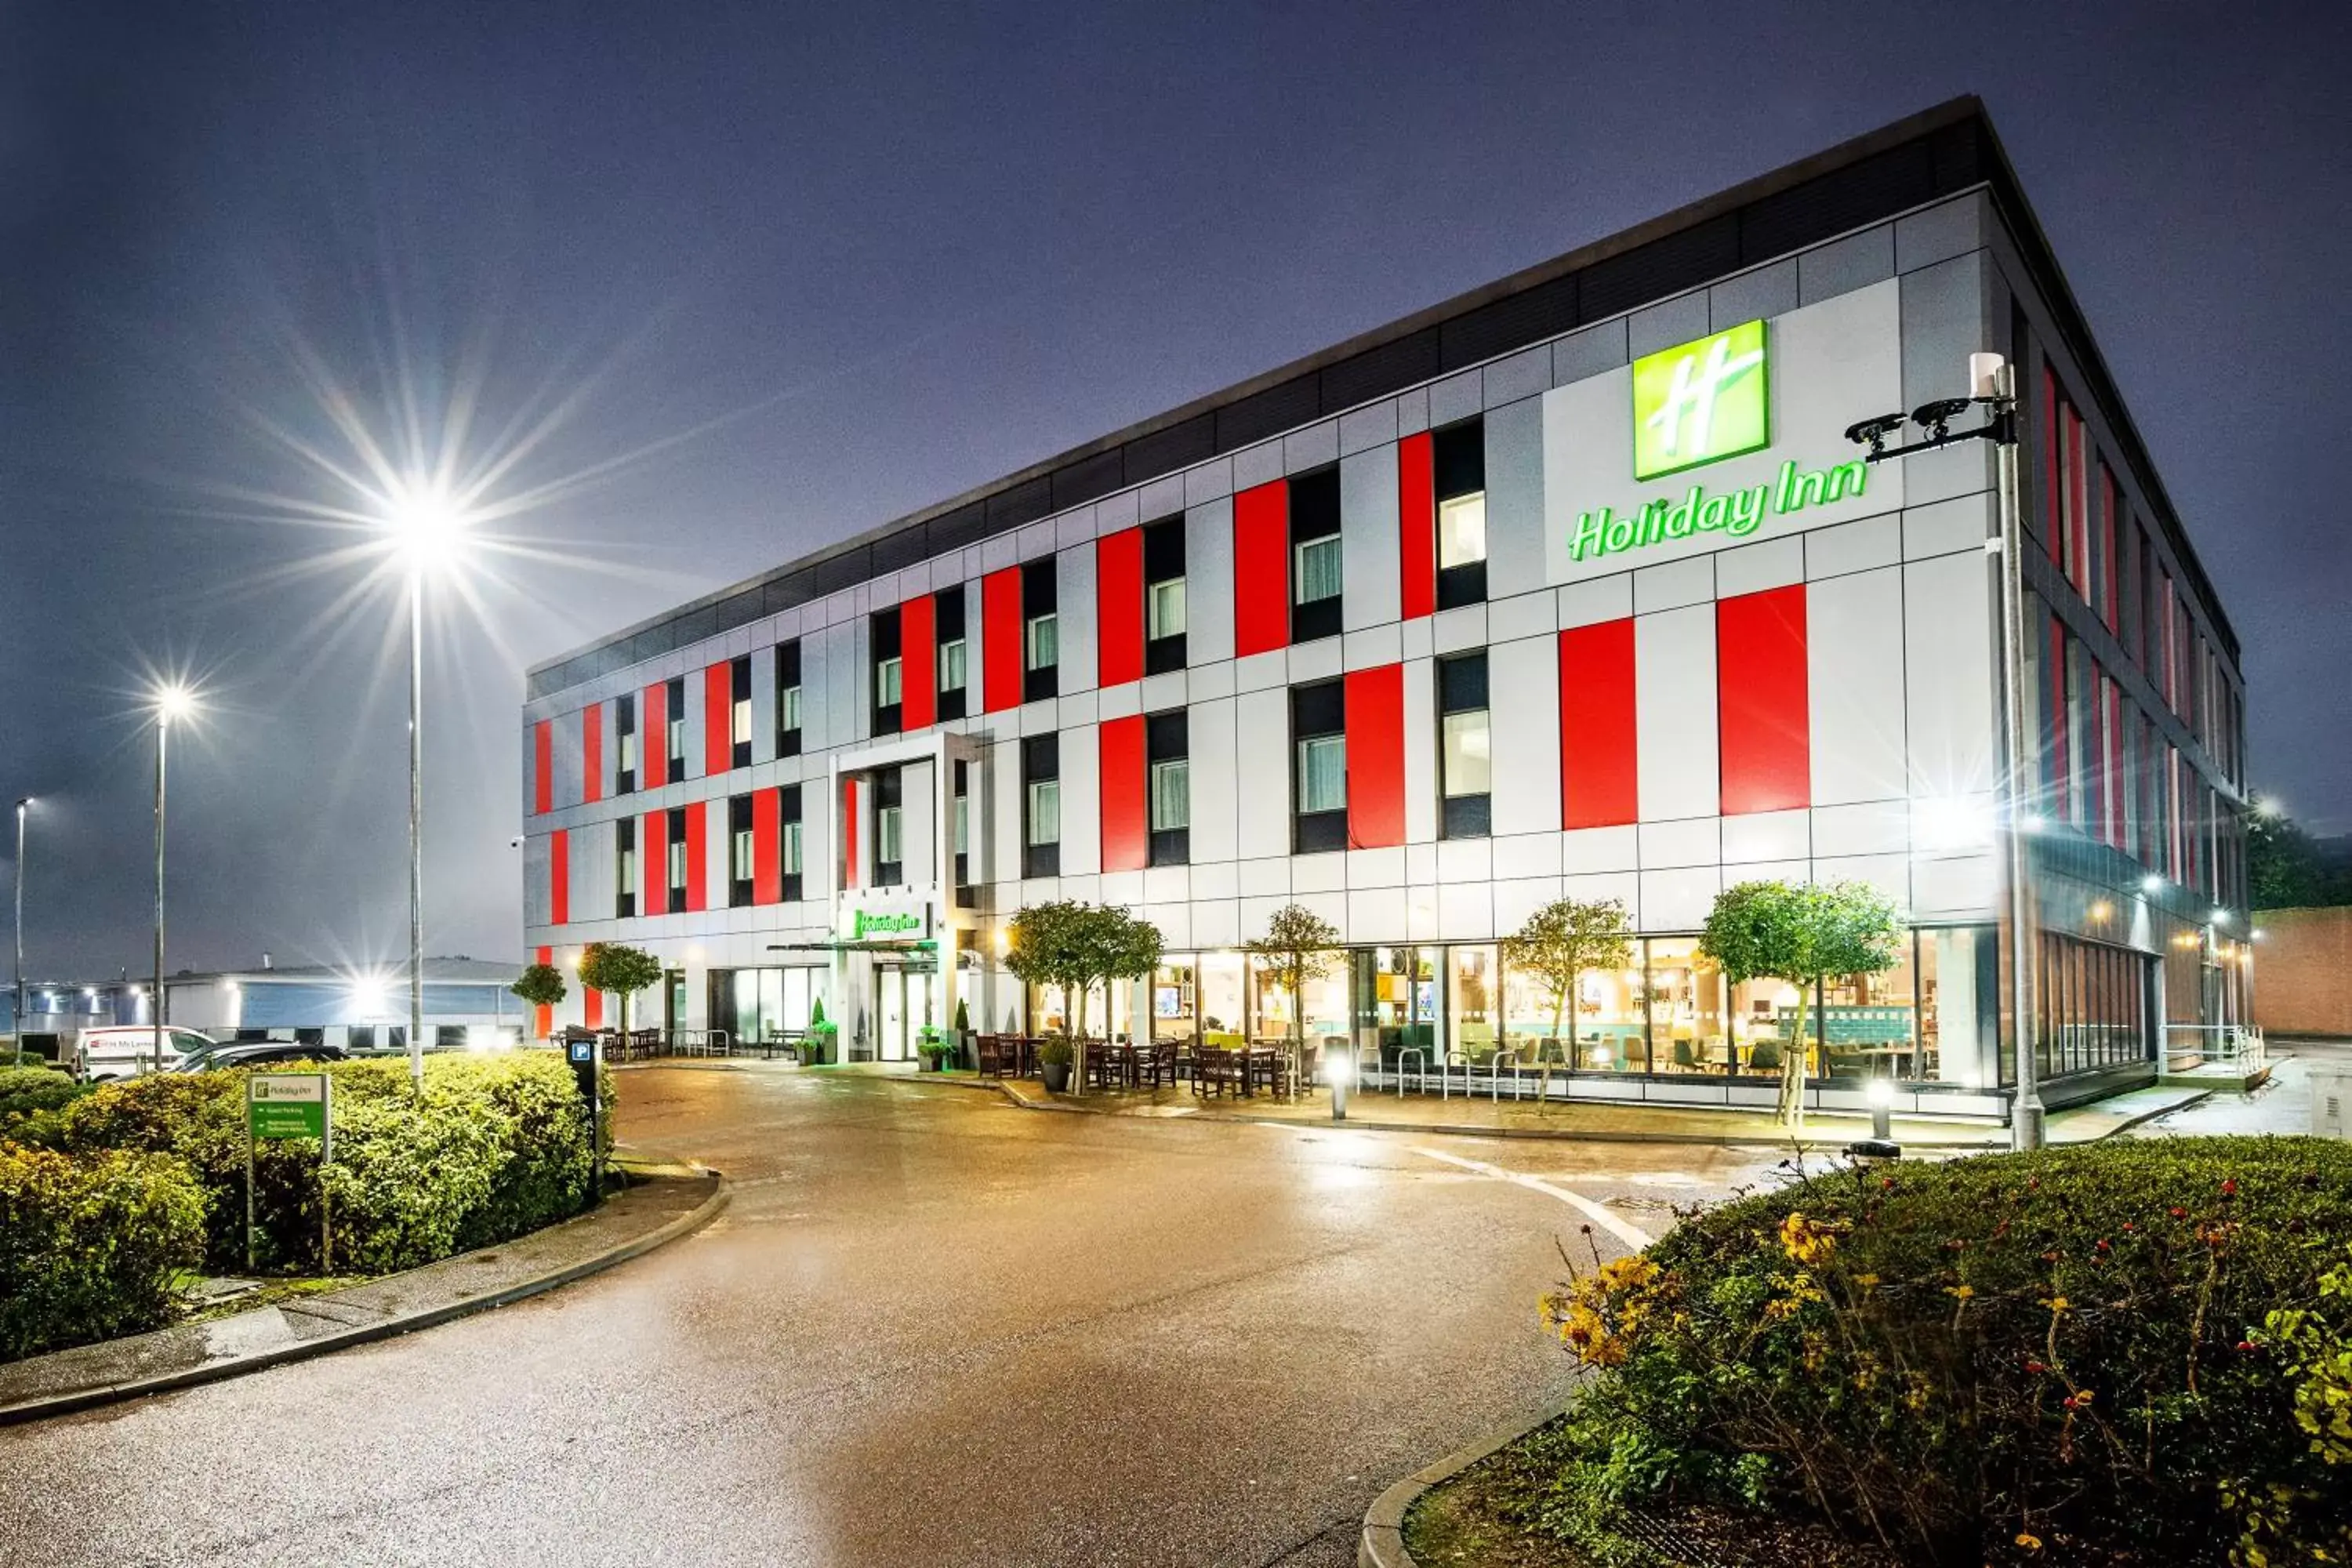 Property Building in Holiday Inn London Luton Airport, an IHG Hotel